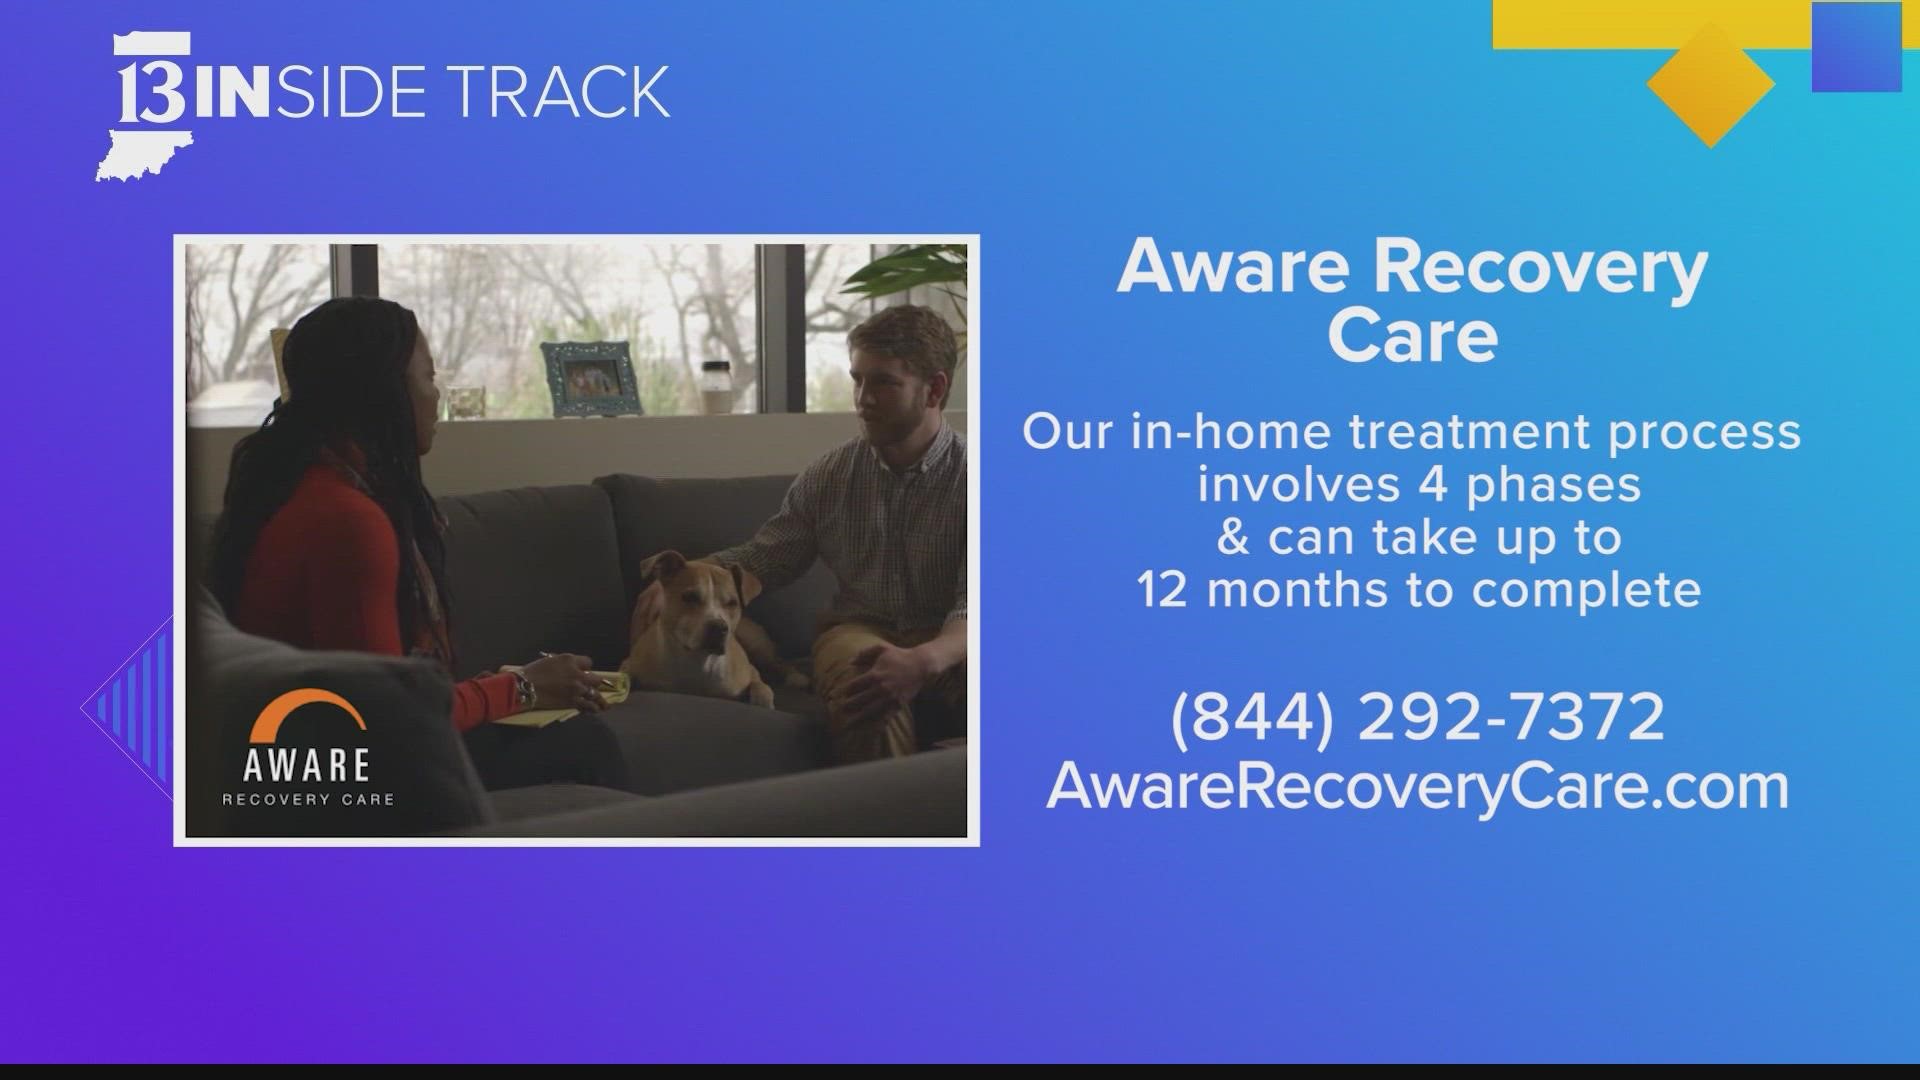 Aware Recovery Care has a team of addiction treatment professionals to provide top rate in-home mental health and substance use disorder treatment.